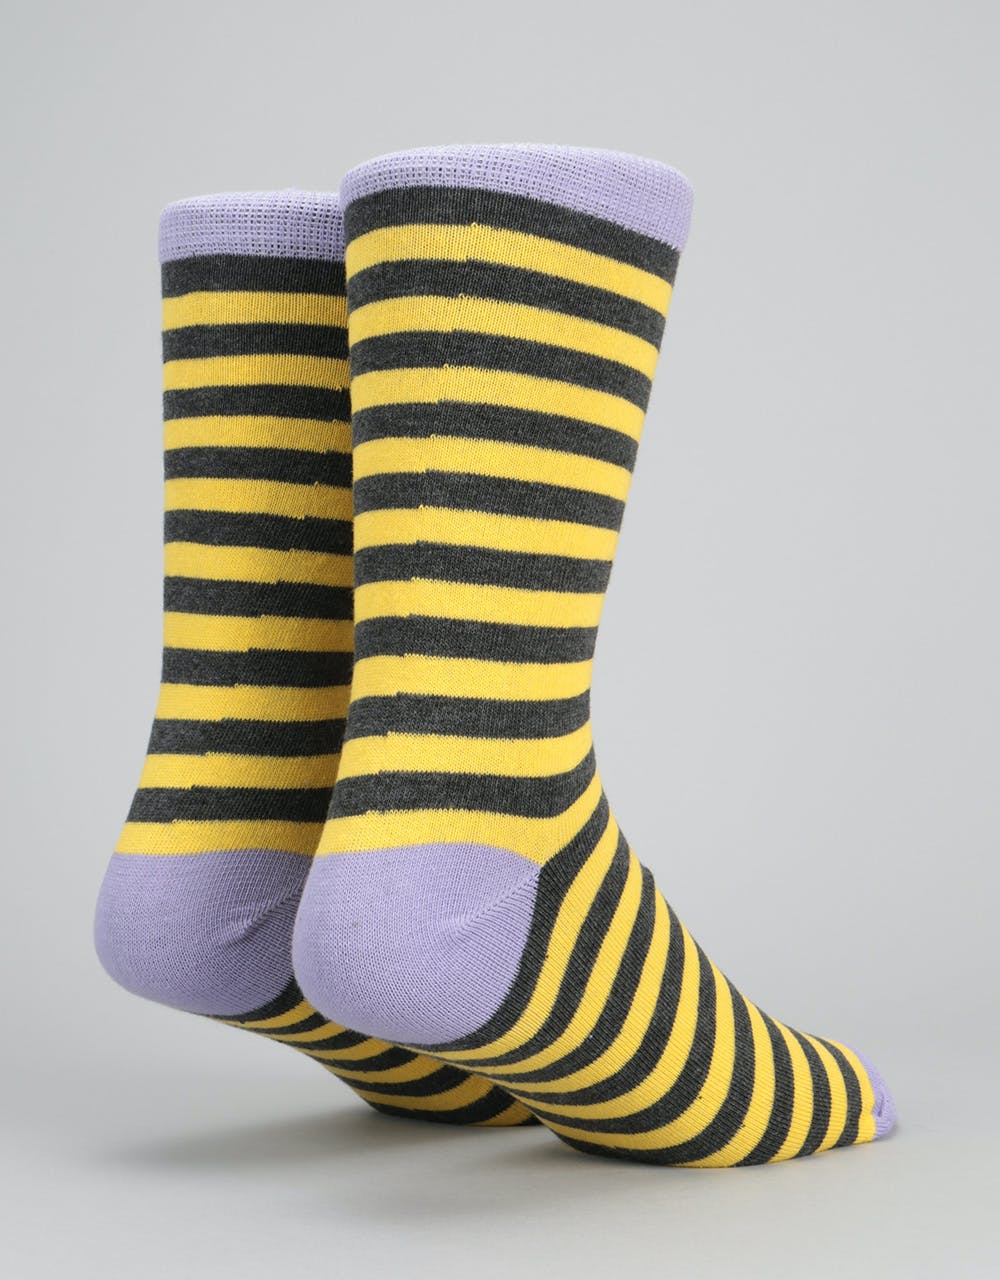 Route One Contrast Socks - Yellow/Grey/Lilac